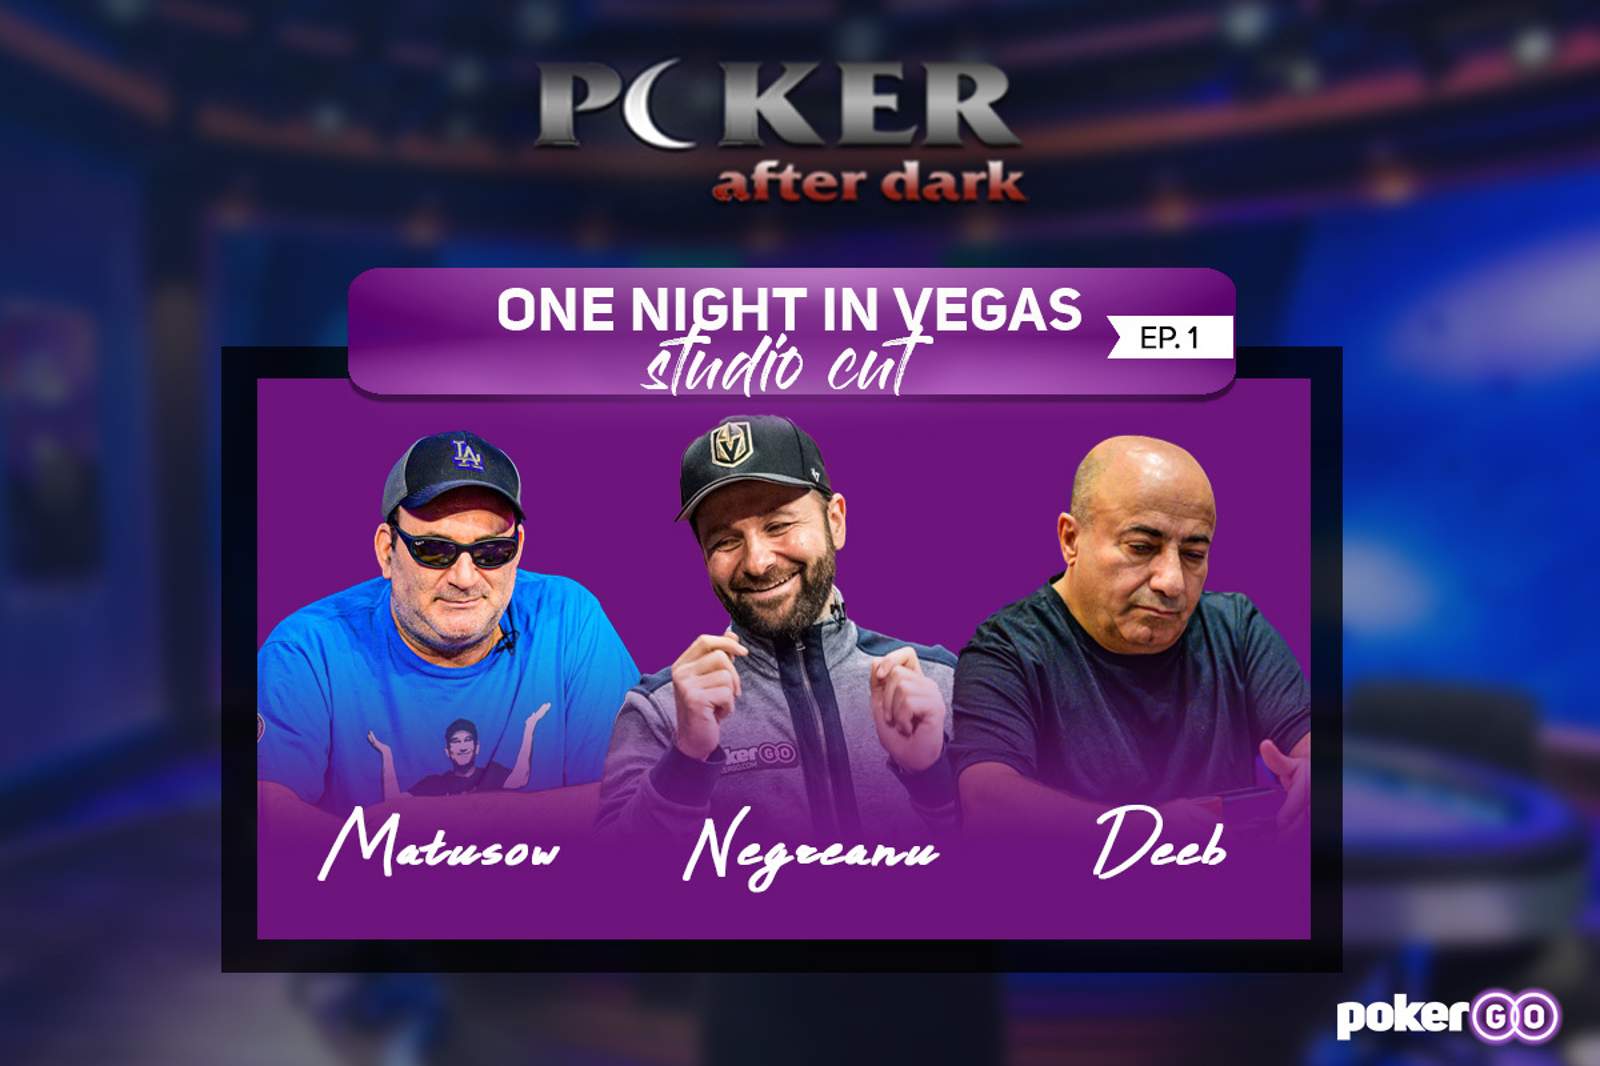 Poker After Dark Power Play Studio Cut Episode 1 on Tonight at 8 p.m. ET